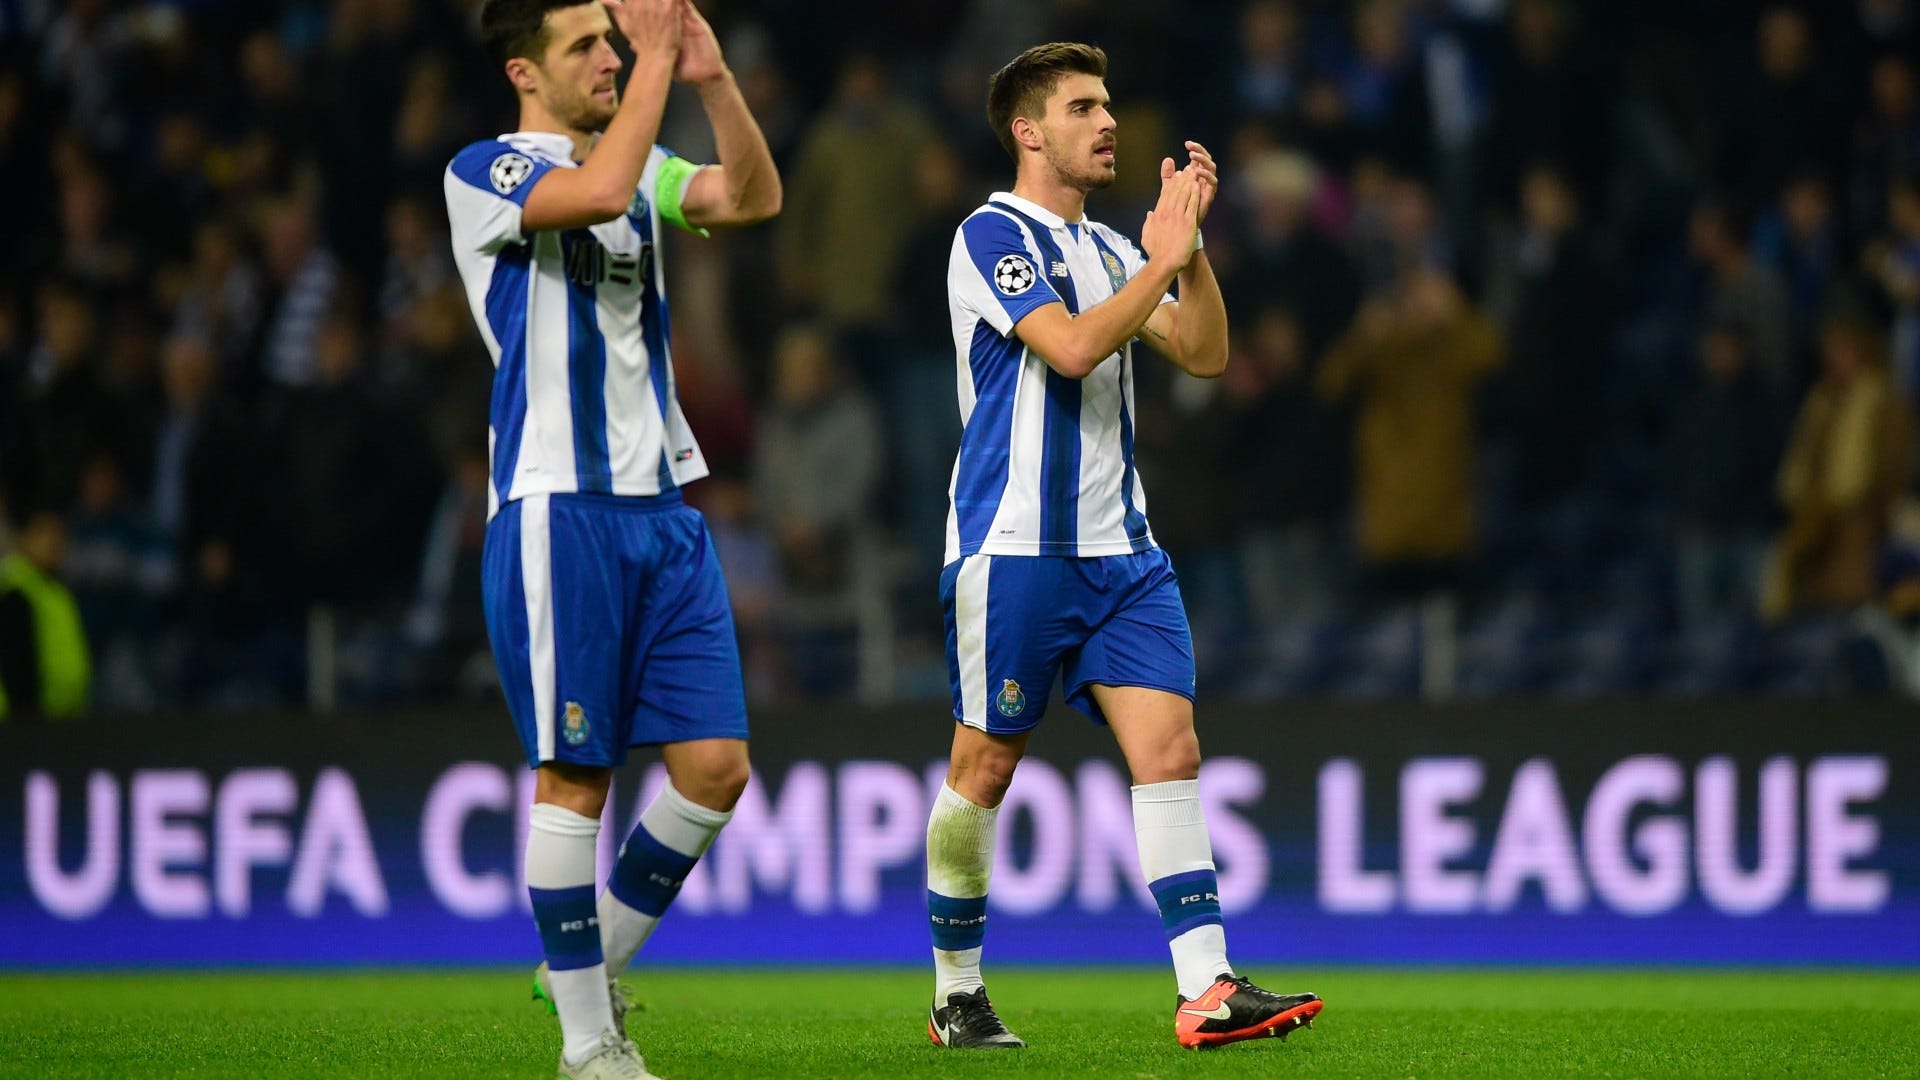  Neves Porto UCL.